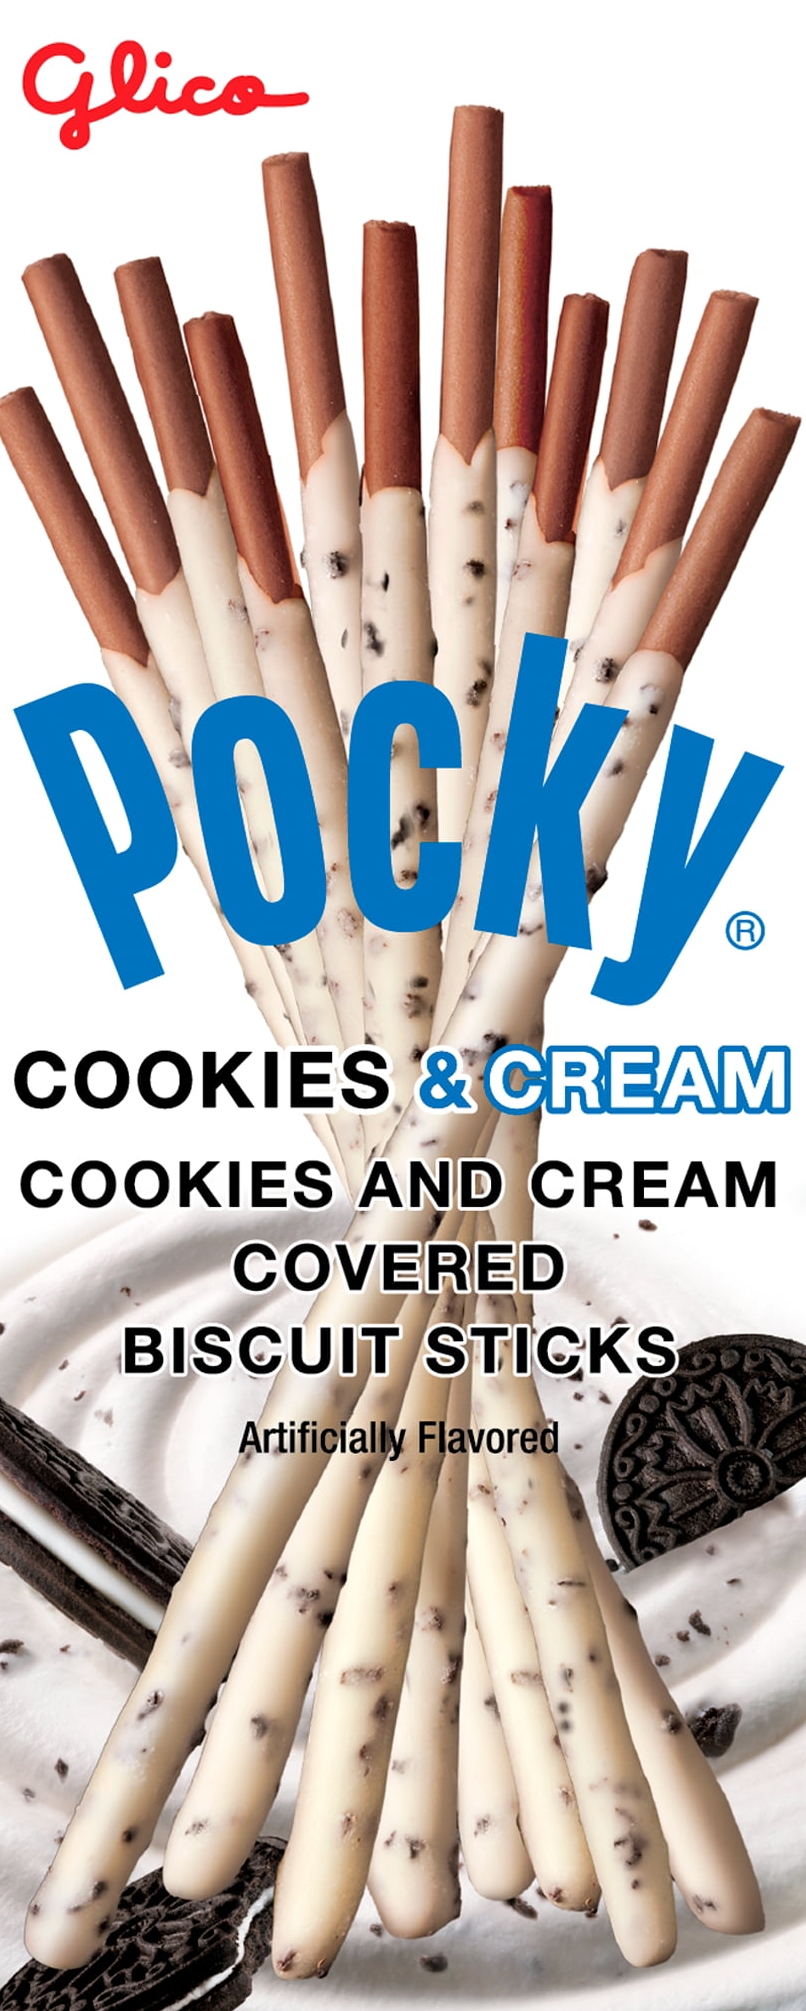 Pocky : Cookies And Cream